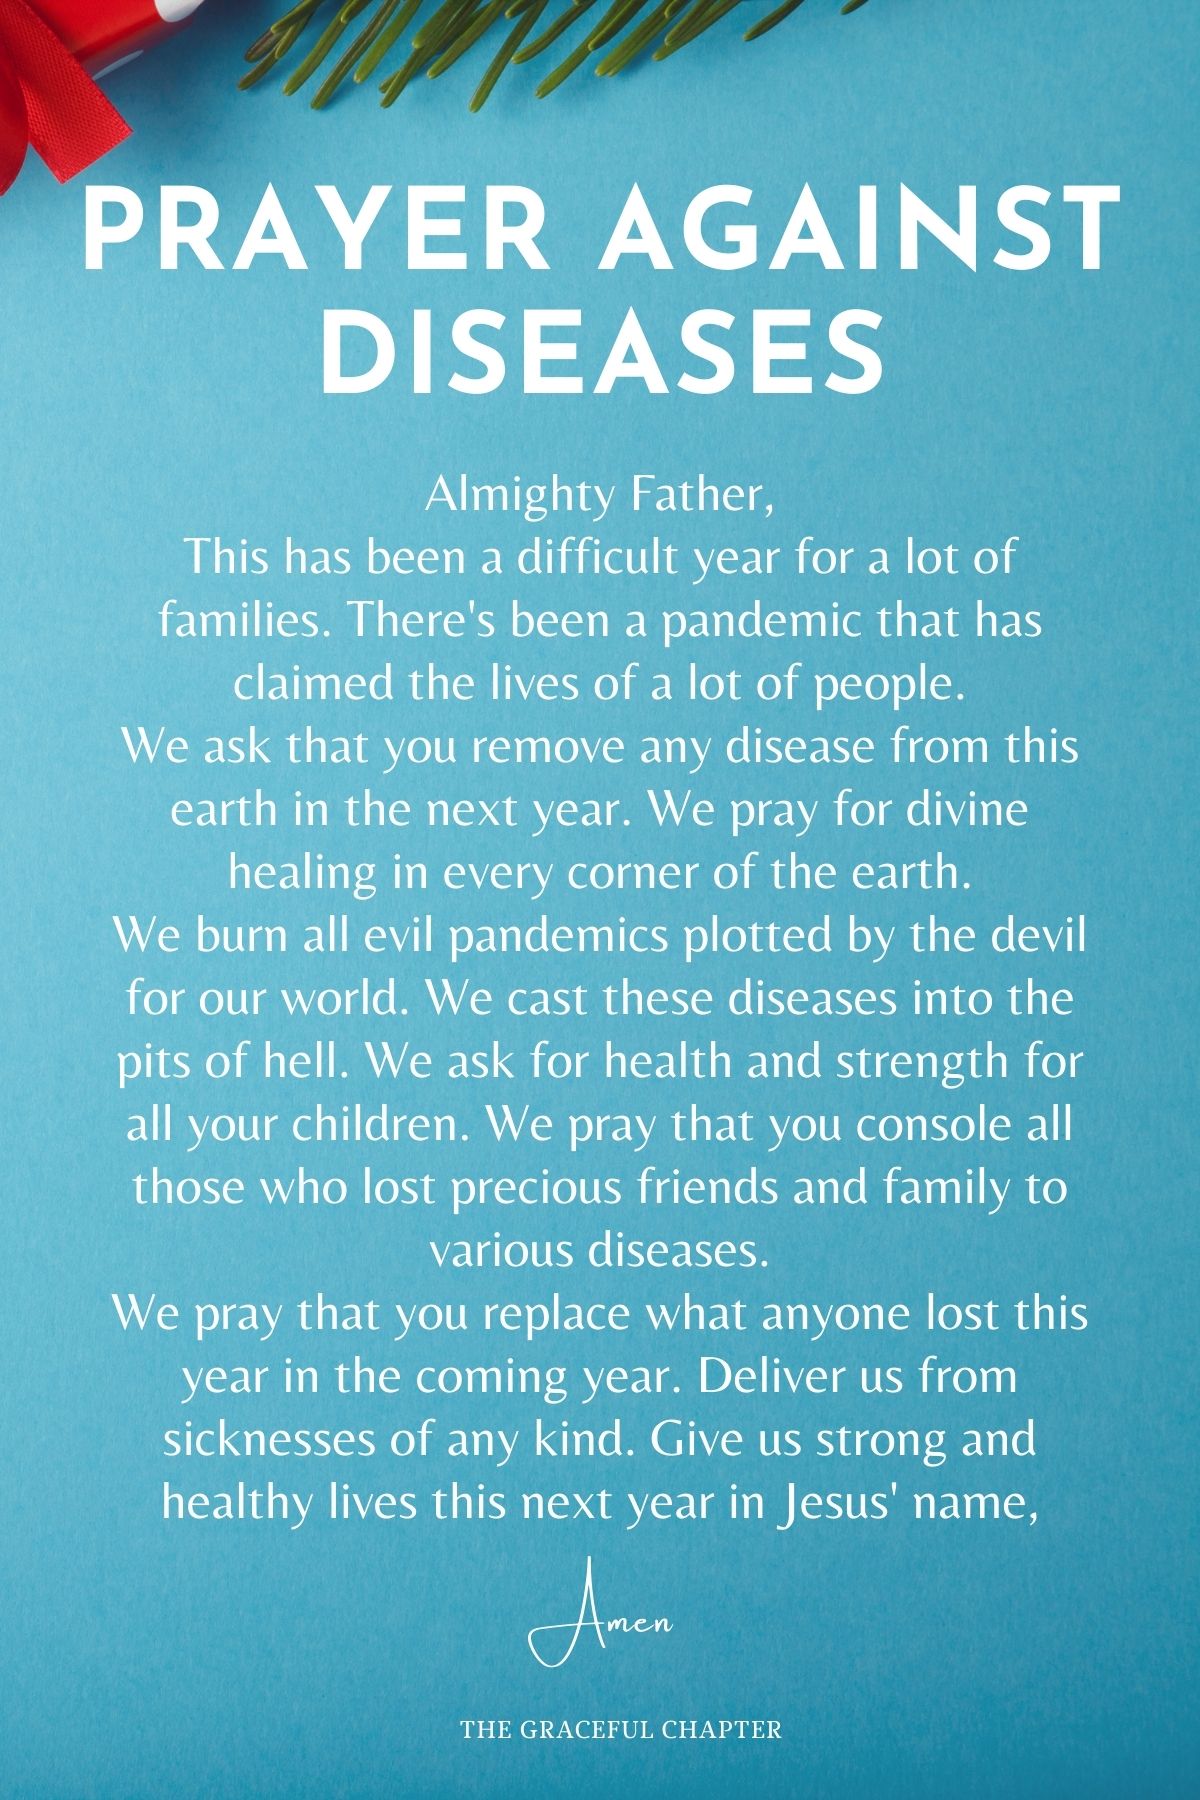 Prayer against Diseases - things to pray about in 2022